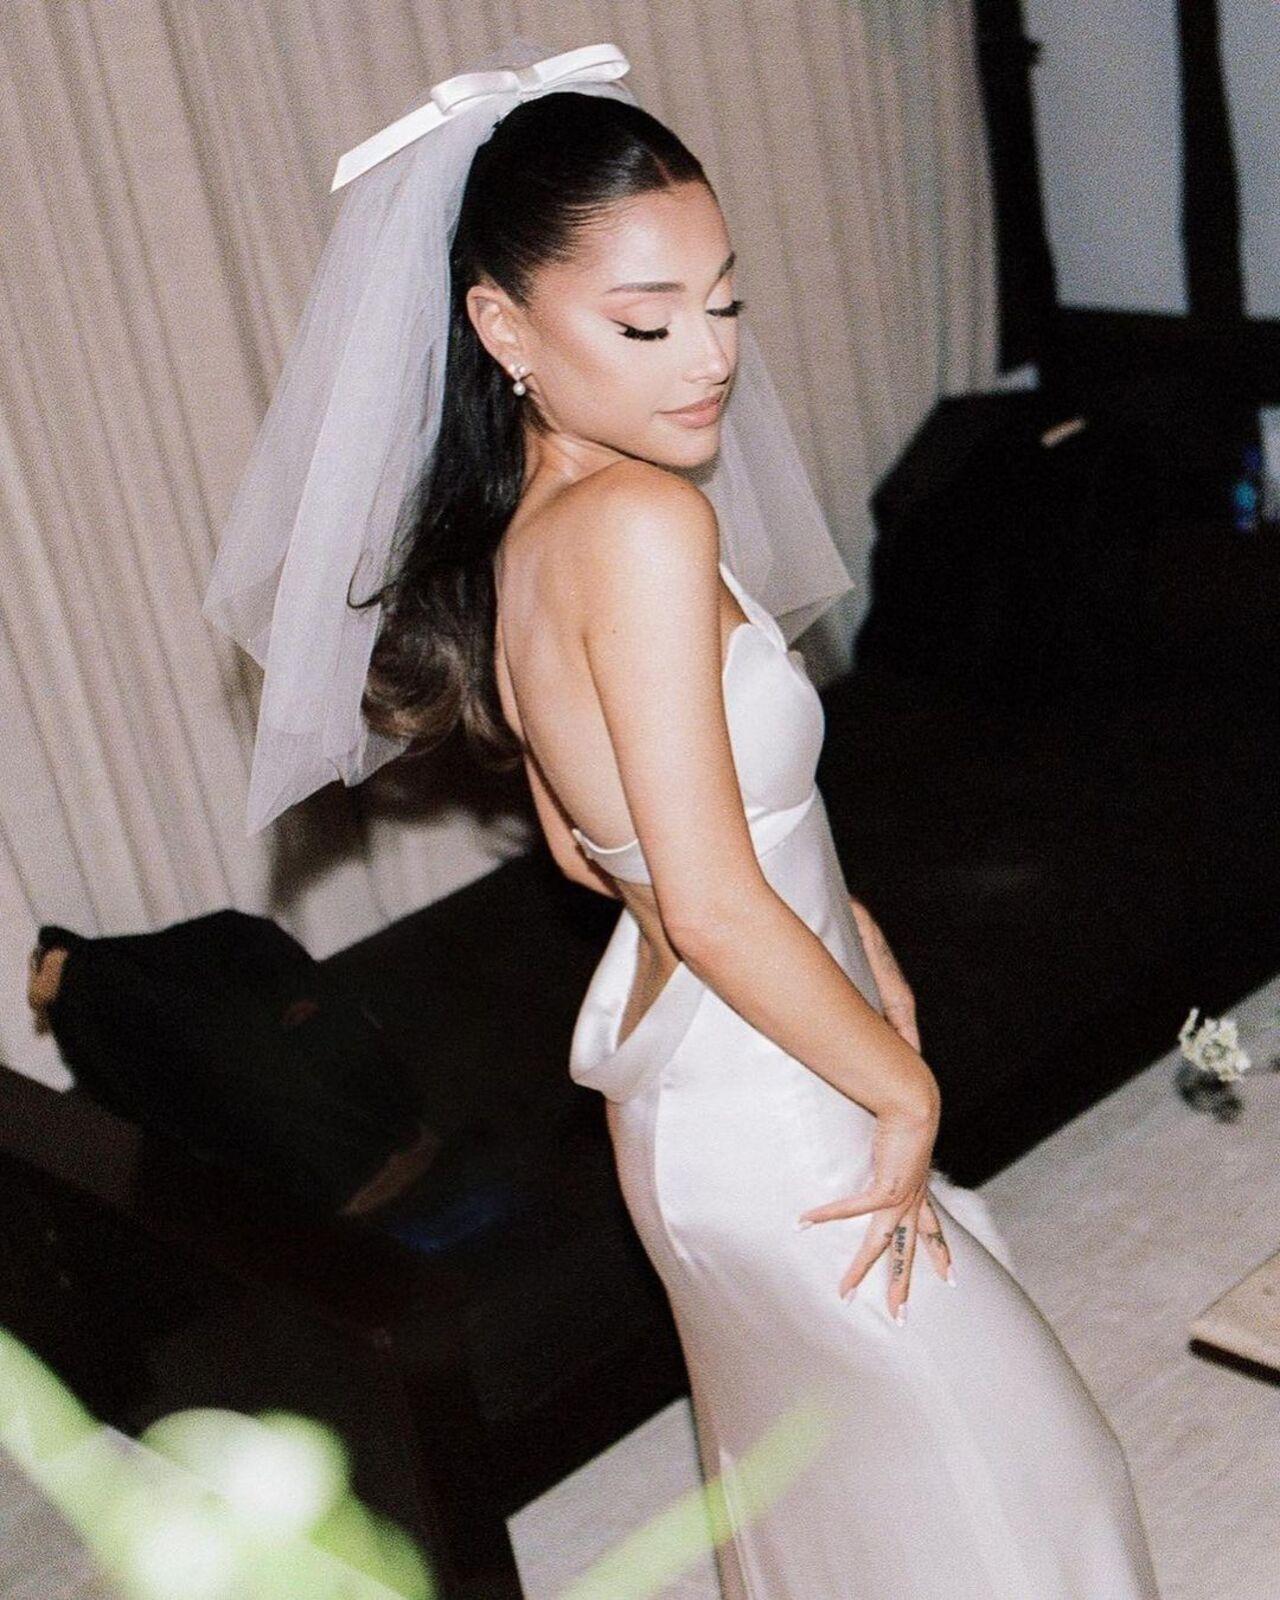 Ariana Grande got hitched to her beau and real estate agent Dalton Gomez in an intimate ceremony in 2021. She wore a Vera Wang Haute dress with a beautiful veil and a bow paired with the songstress' signature ponytail. The dress featured a sweetheart neck, a low-cut back, and a slit around the leg space.